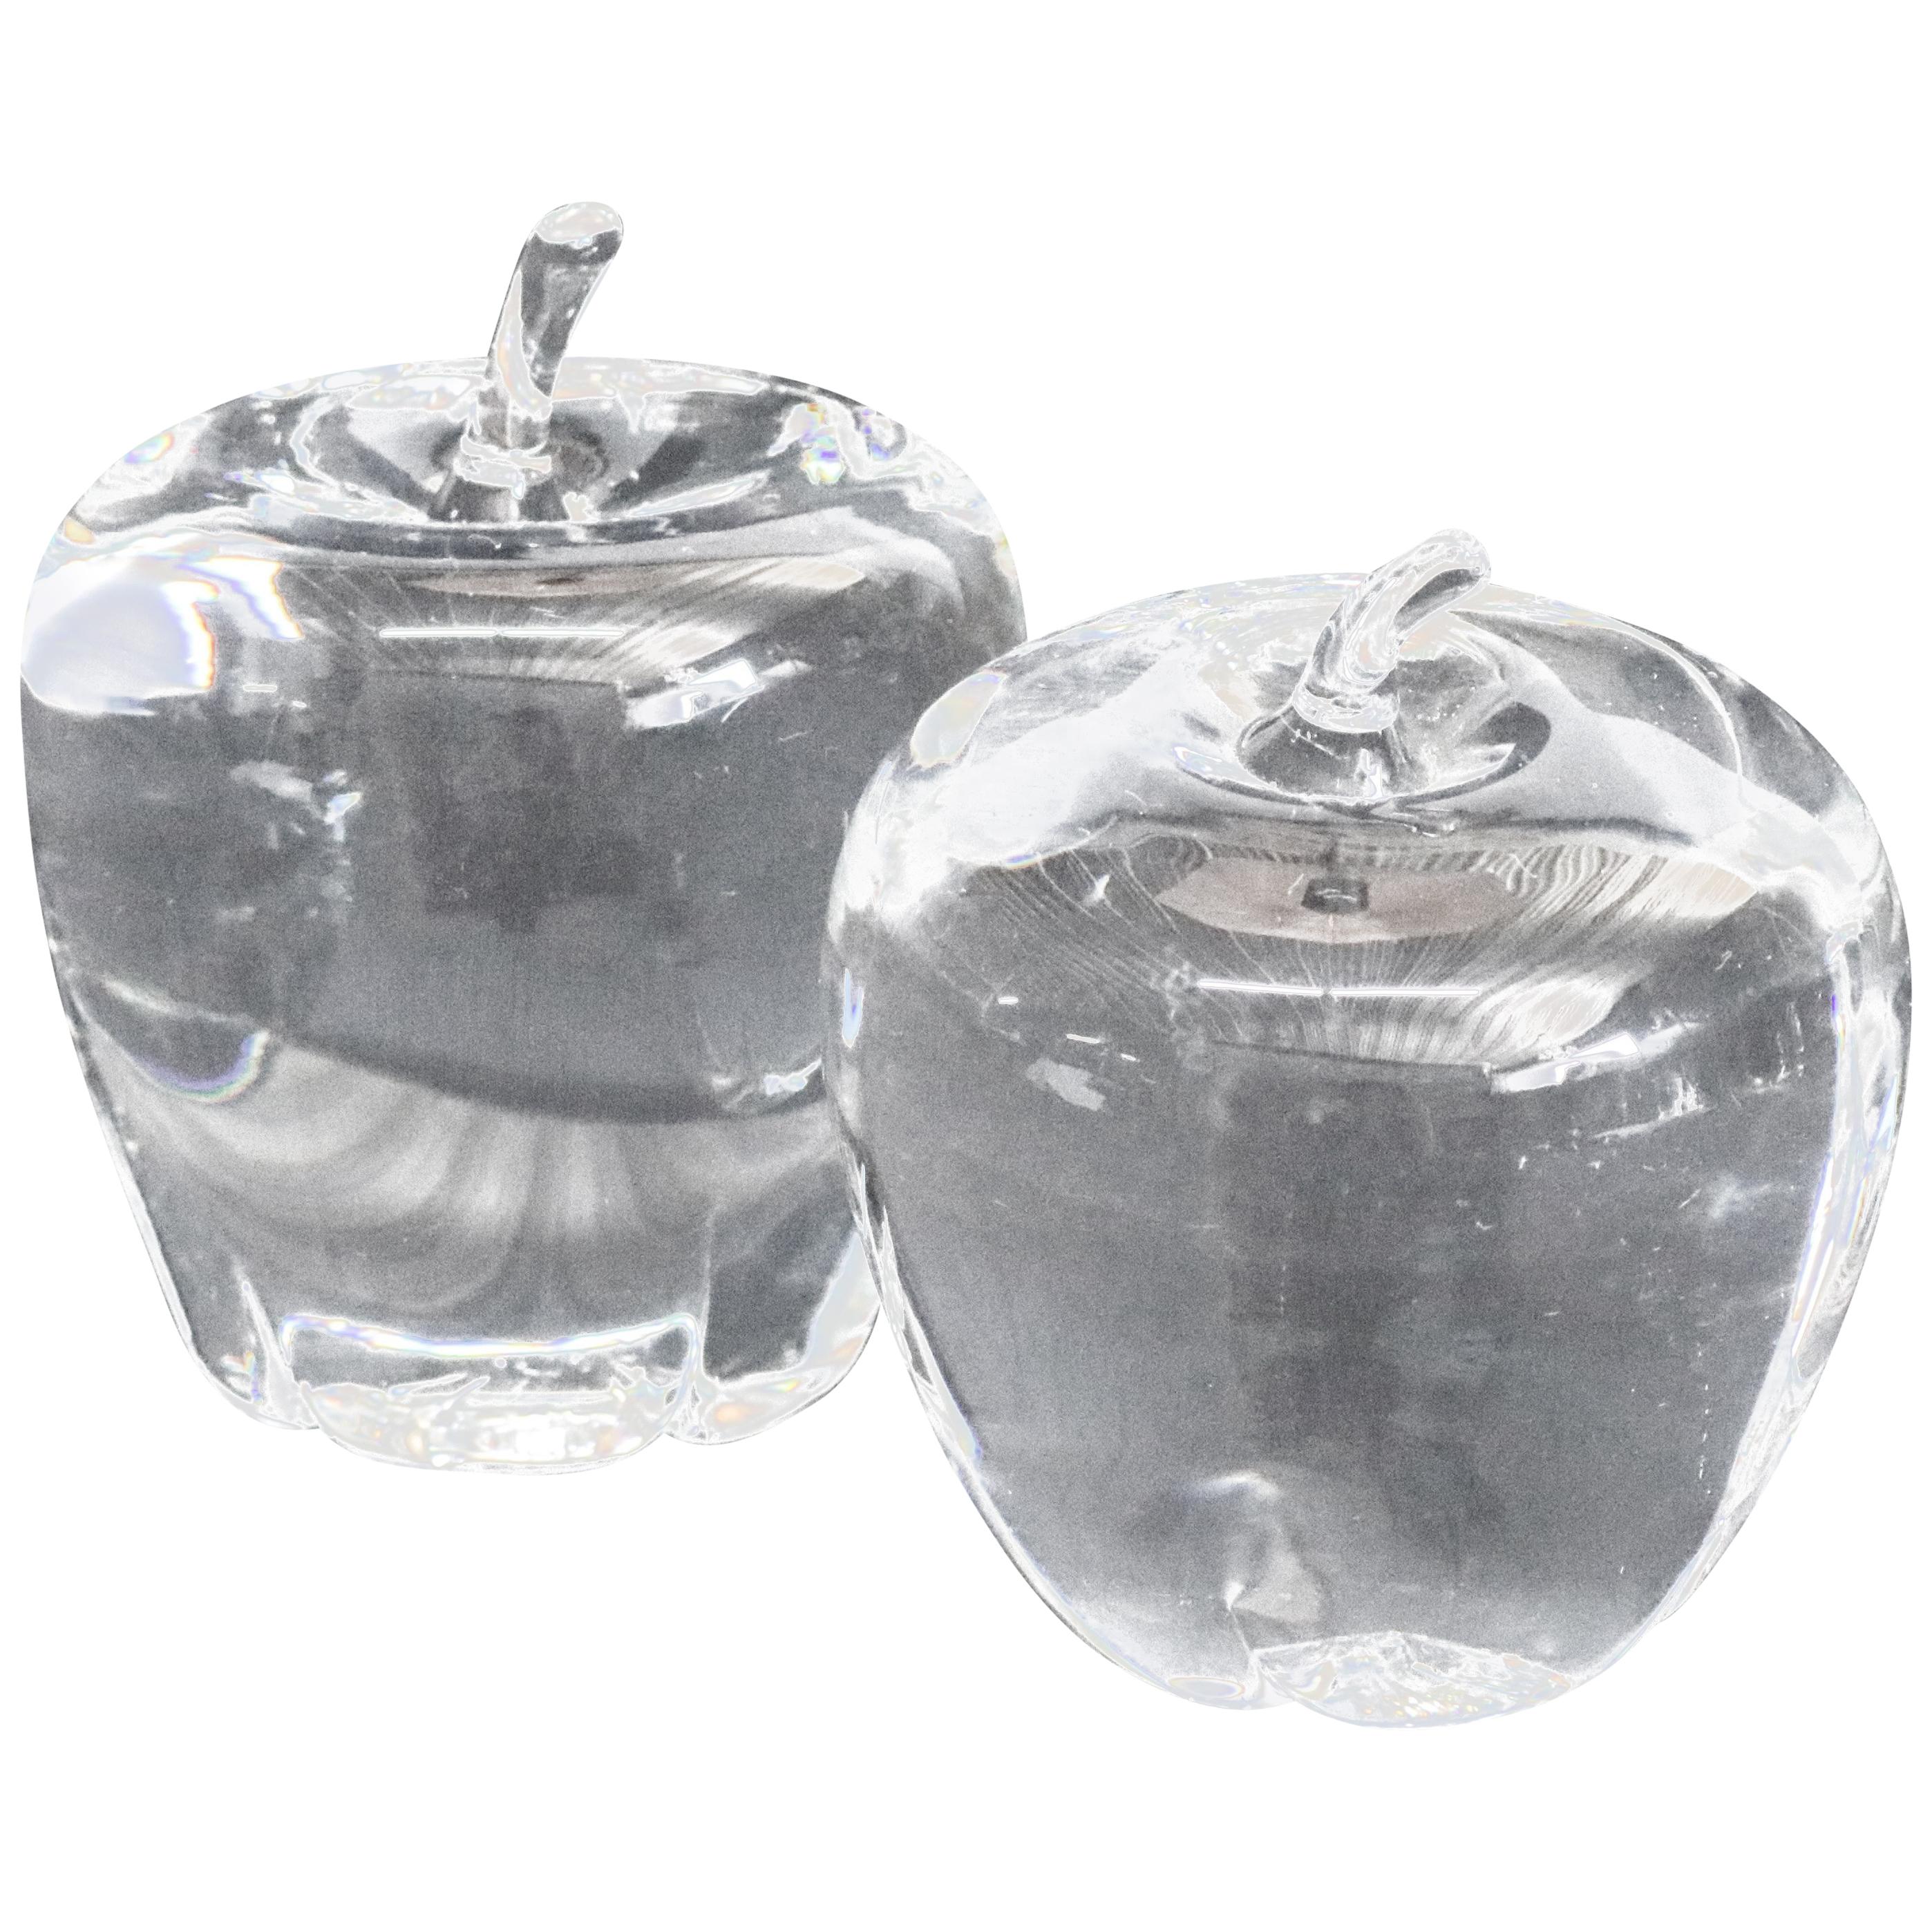 2 Steuben Figurative Crystal Fruit Sculpture Paperweights of Apples, Signed